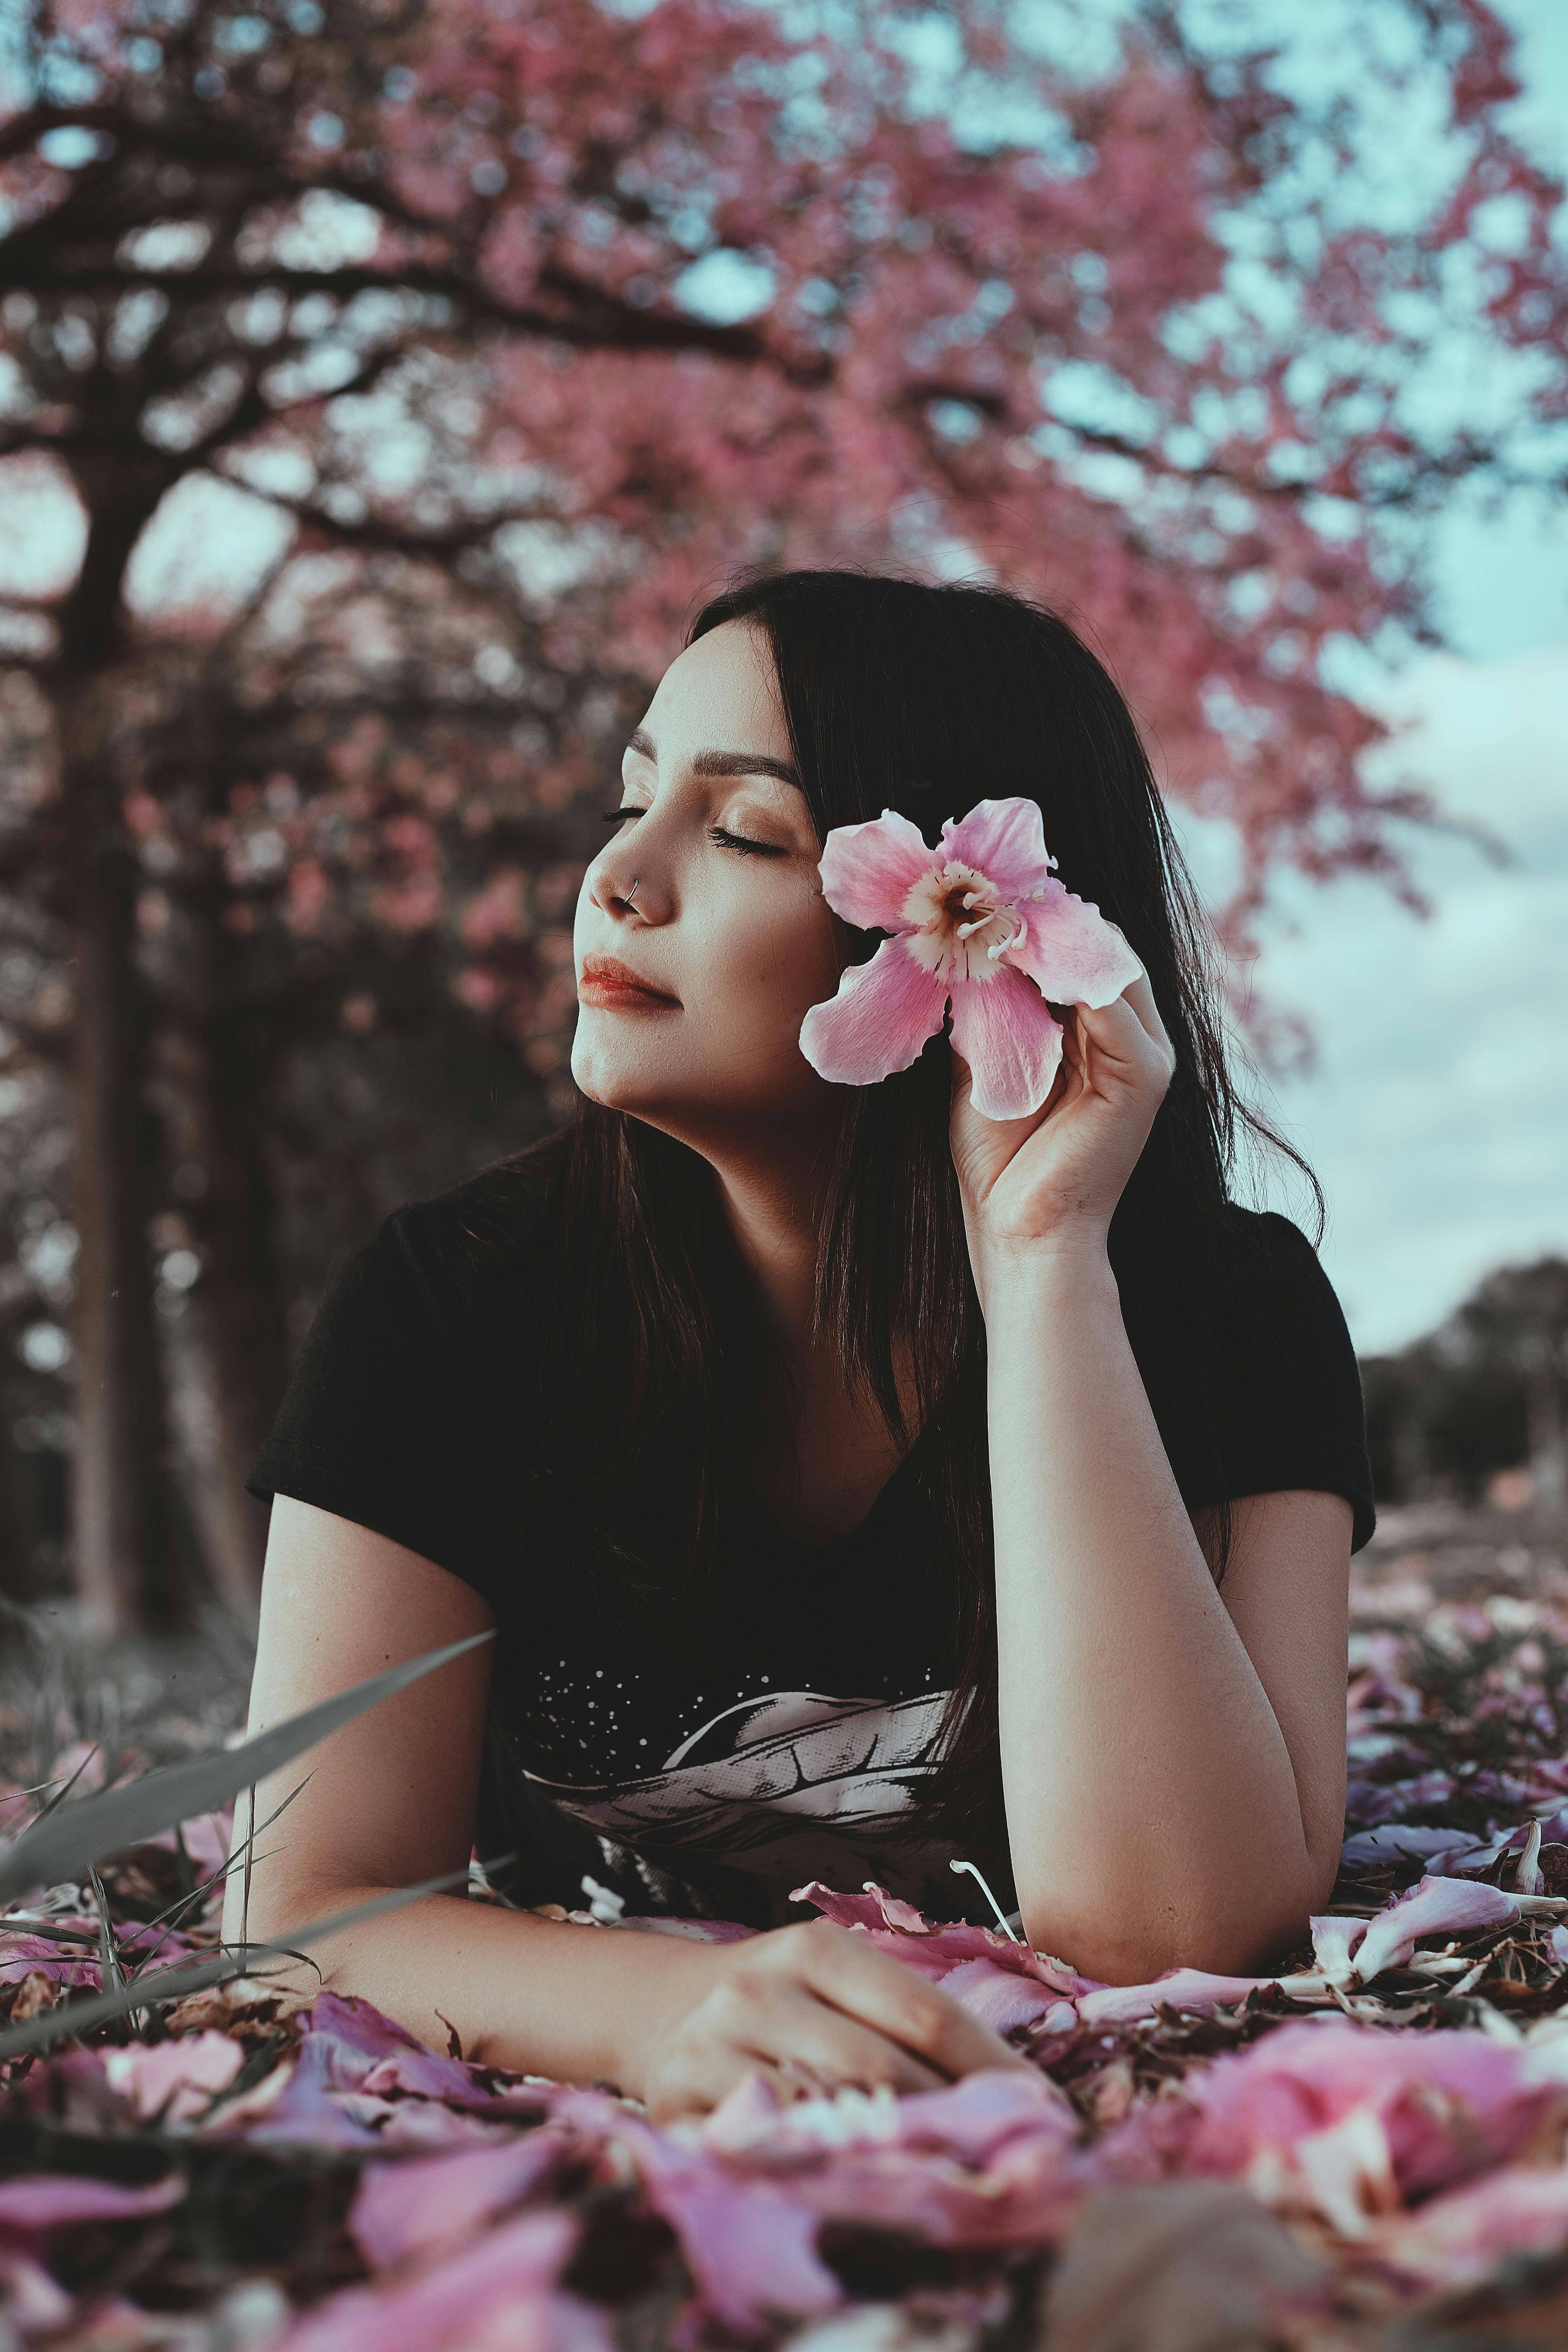 Woman Putting Pink Flower in Her Hair · Free Stock Photo